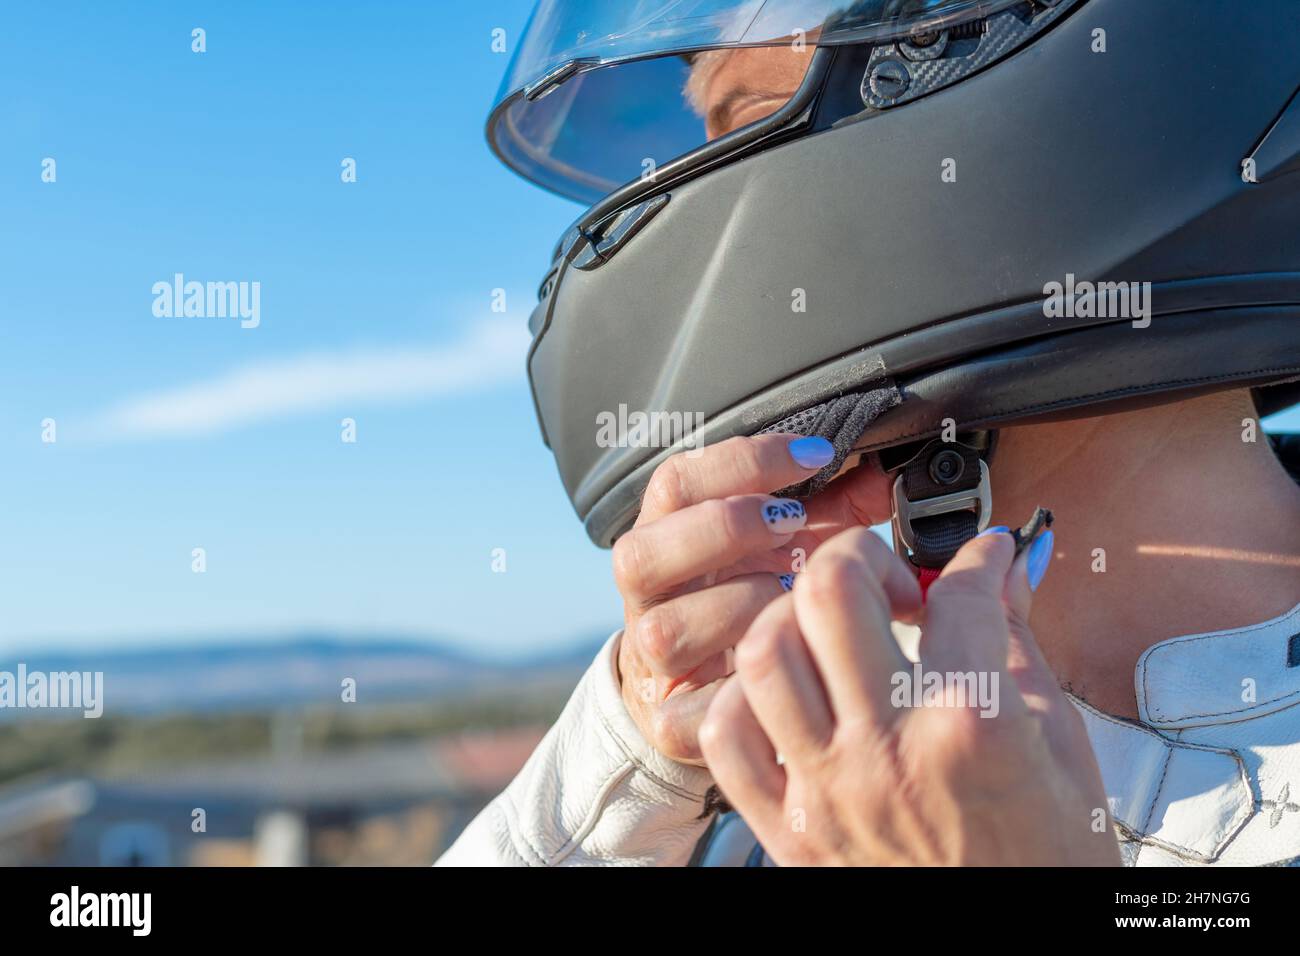 young female biker fastening her safety helmet to ride a motorcycle. safety and protection concept on the road Stock Photo